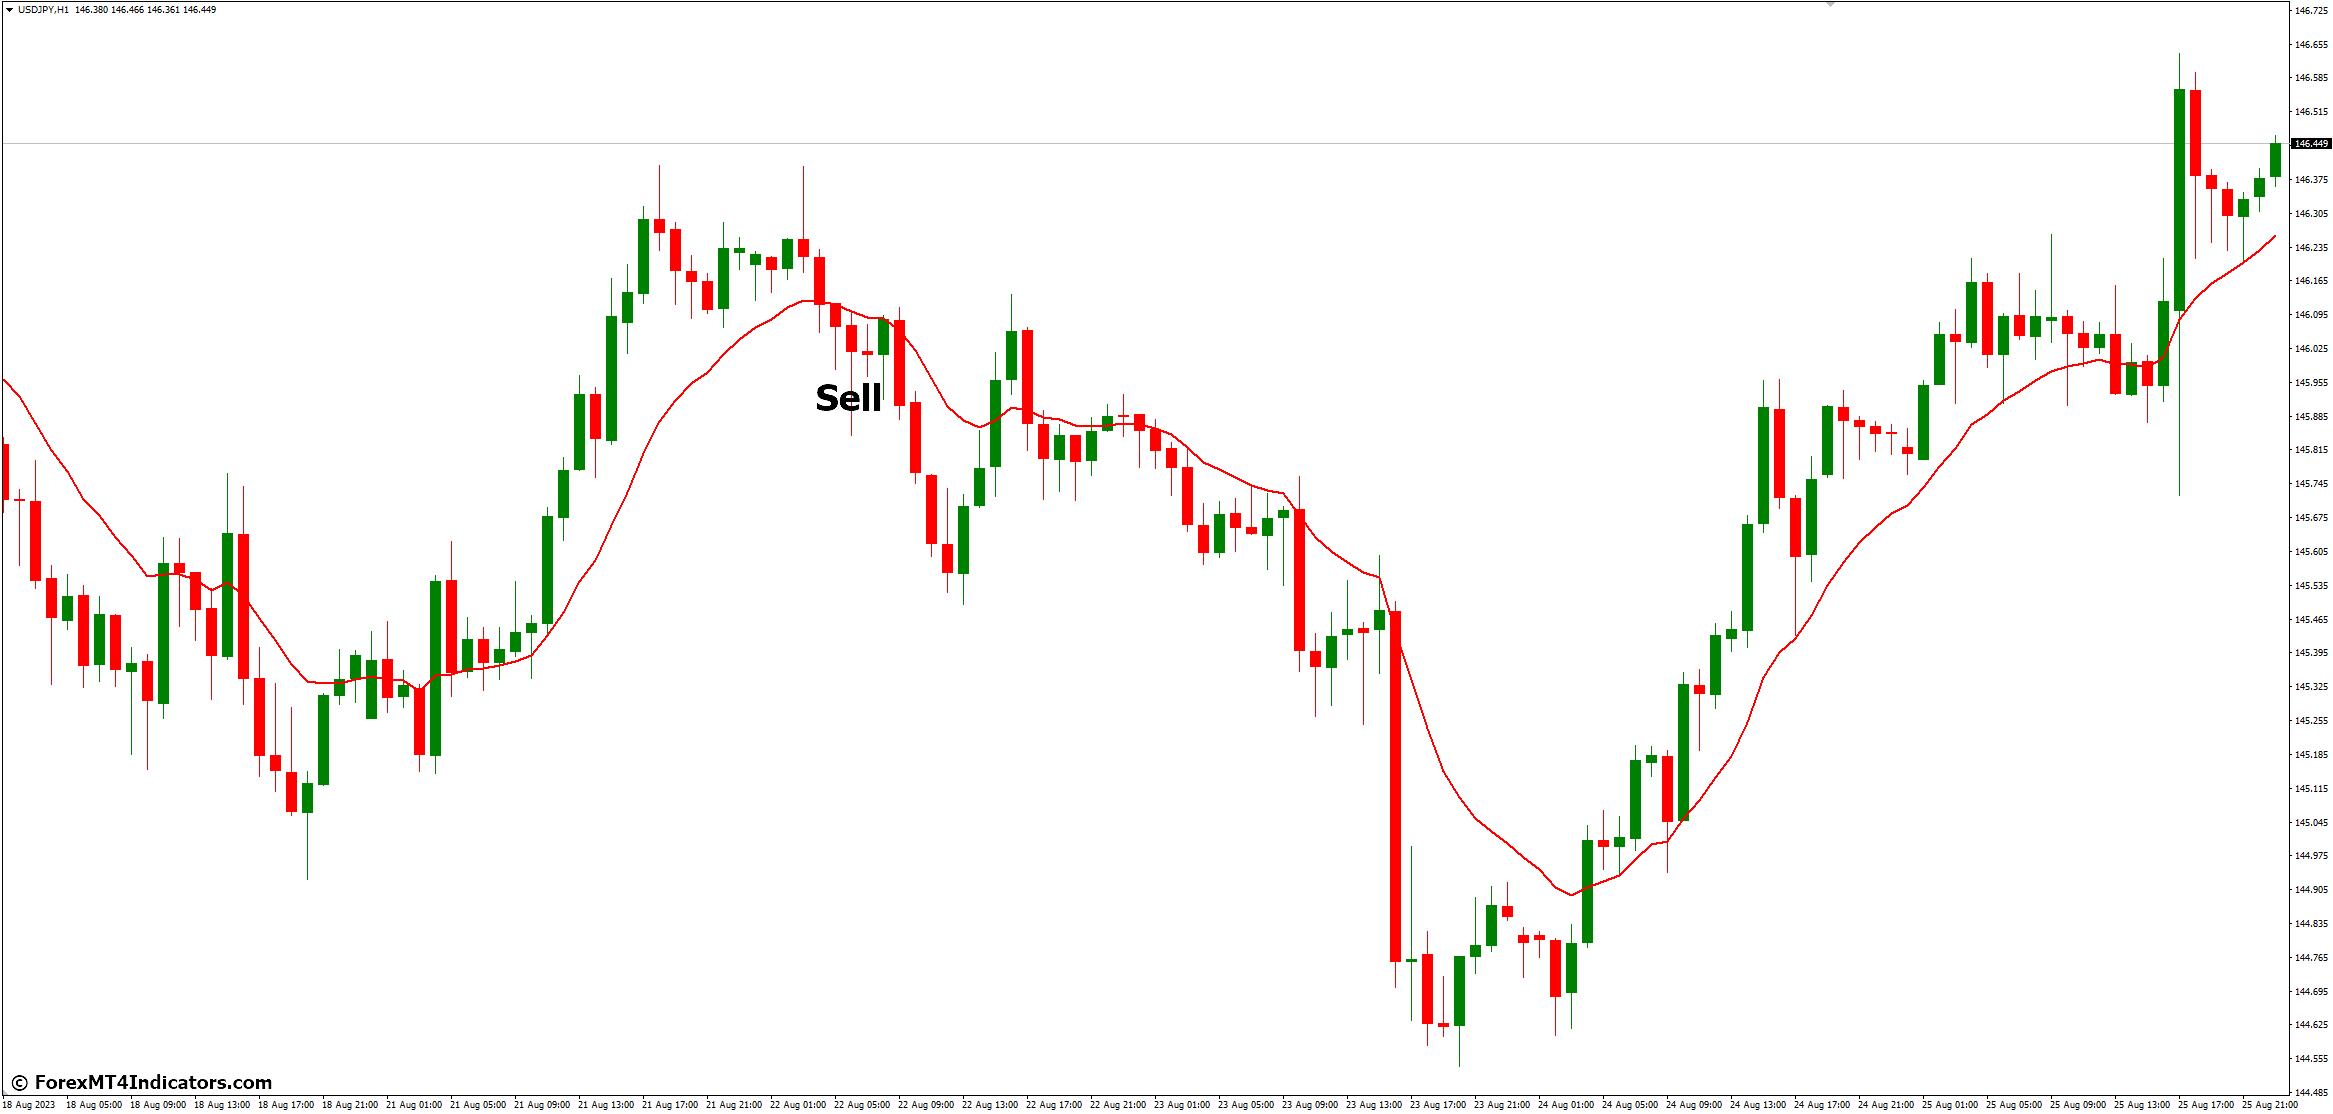 How to Trade with EMA MT4 Indicator - Sell Entry